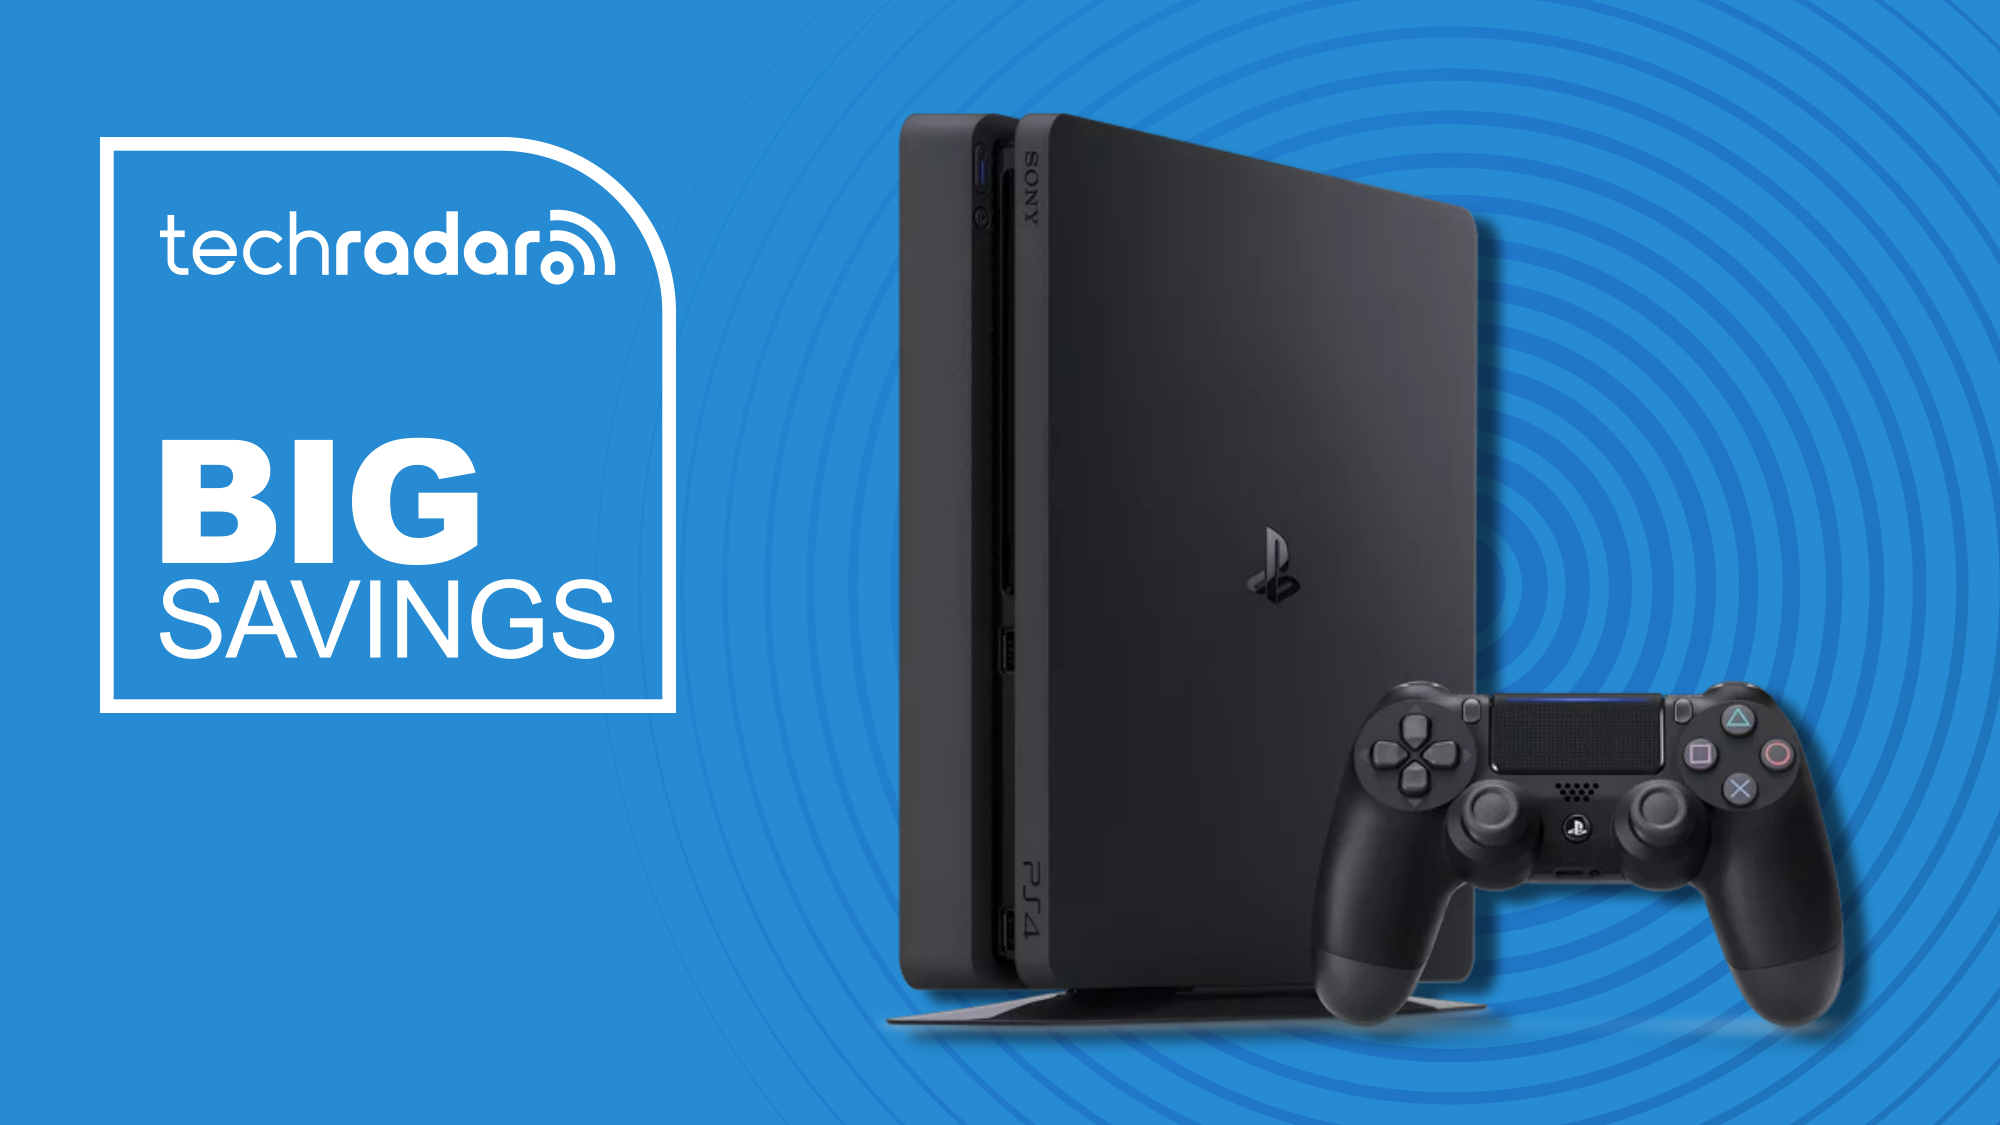 Best PlayStation Deals In June 2021: PS5 And PS4 Deals, Sales, And